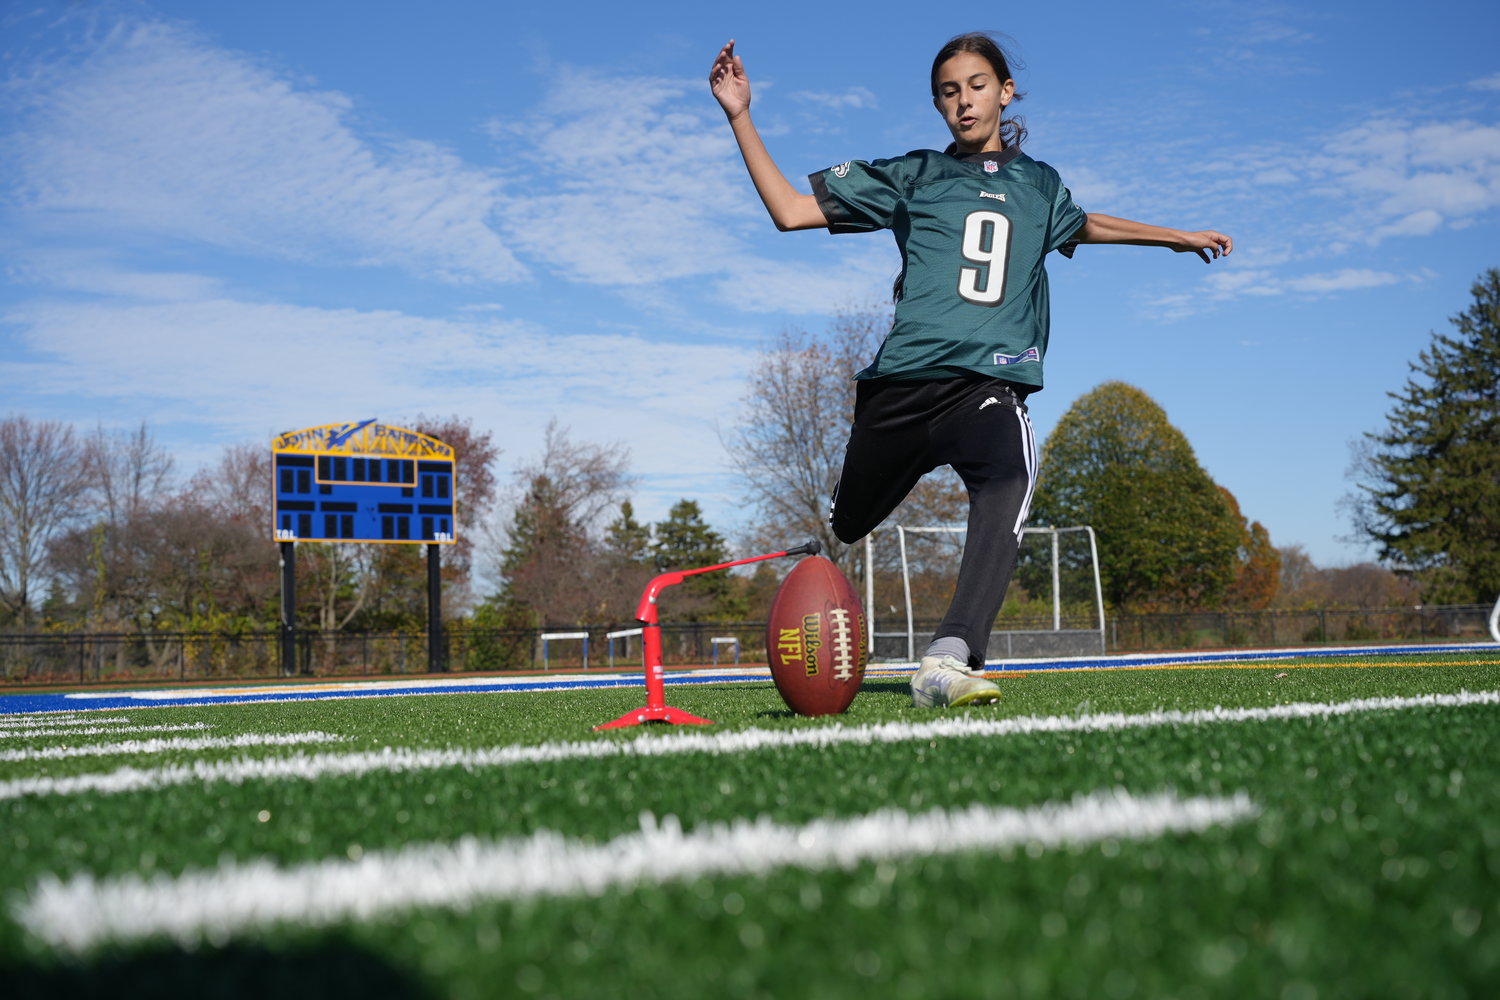 Elizabeth Serra, 13, just finished her first season as a kicker and wide receiver for the Woodland Jets football team. She scored 16 points this season for the team.